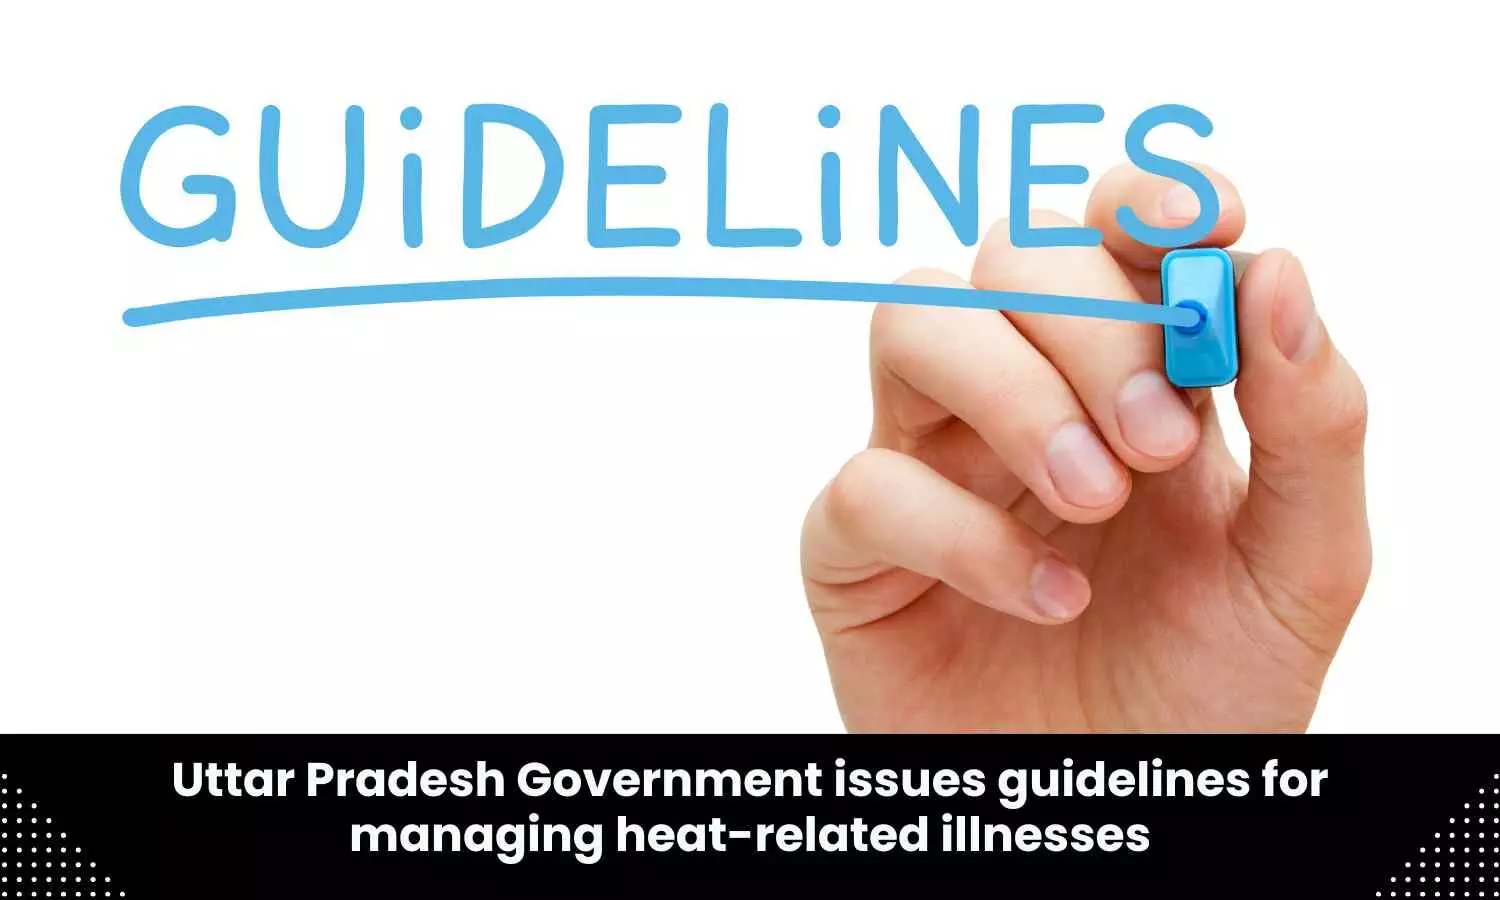 UP Health Dept releases guidelines for heat-related illnesses management